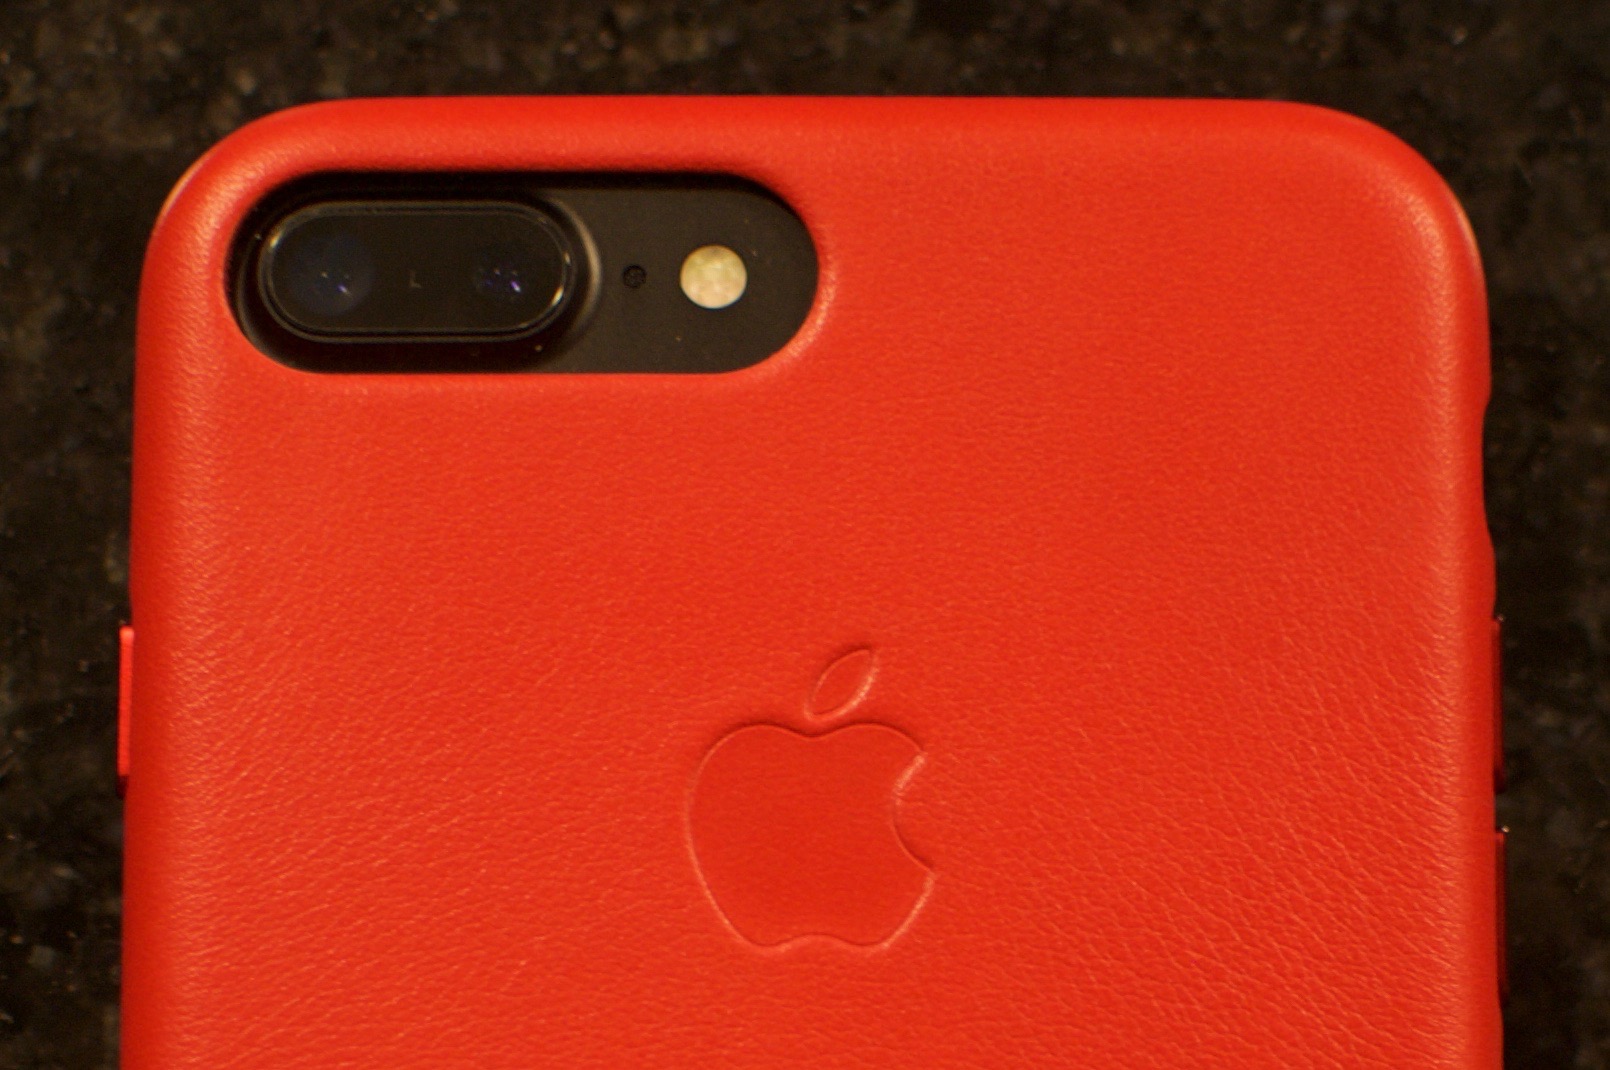 iPhone 7 in red leather Apple case